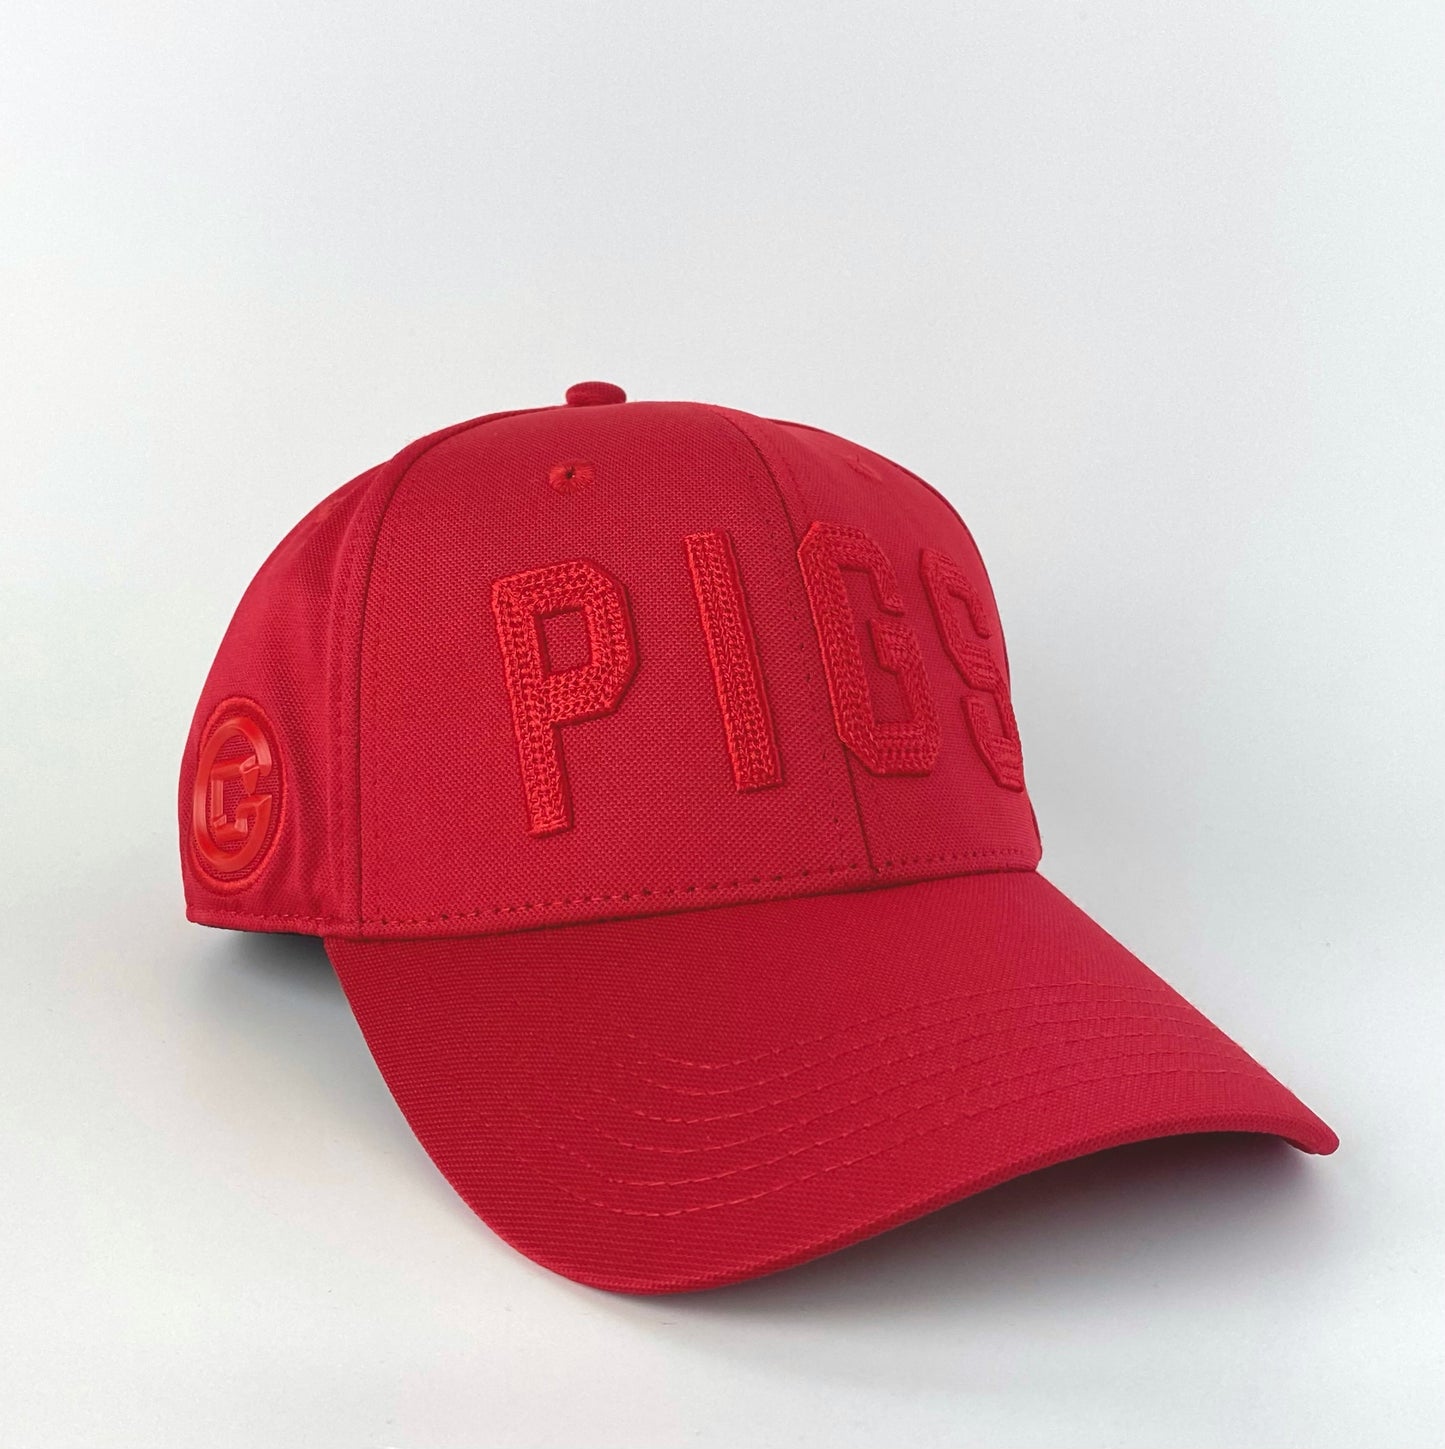 The MONOCHROMATIC "OG" PIGS - Red - Snapback - Curved Bill